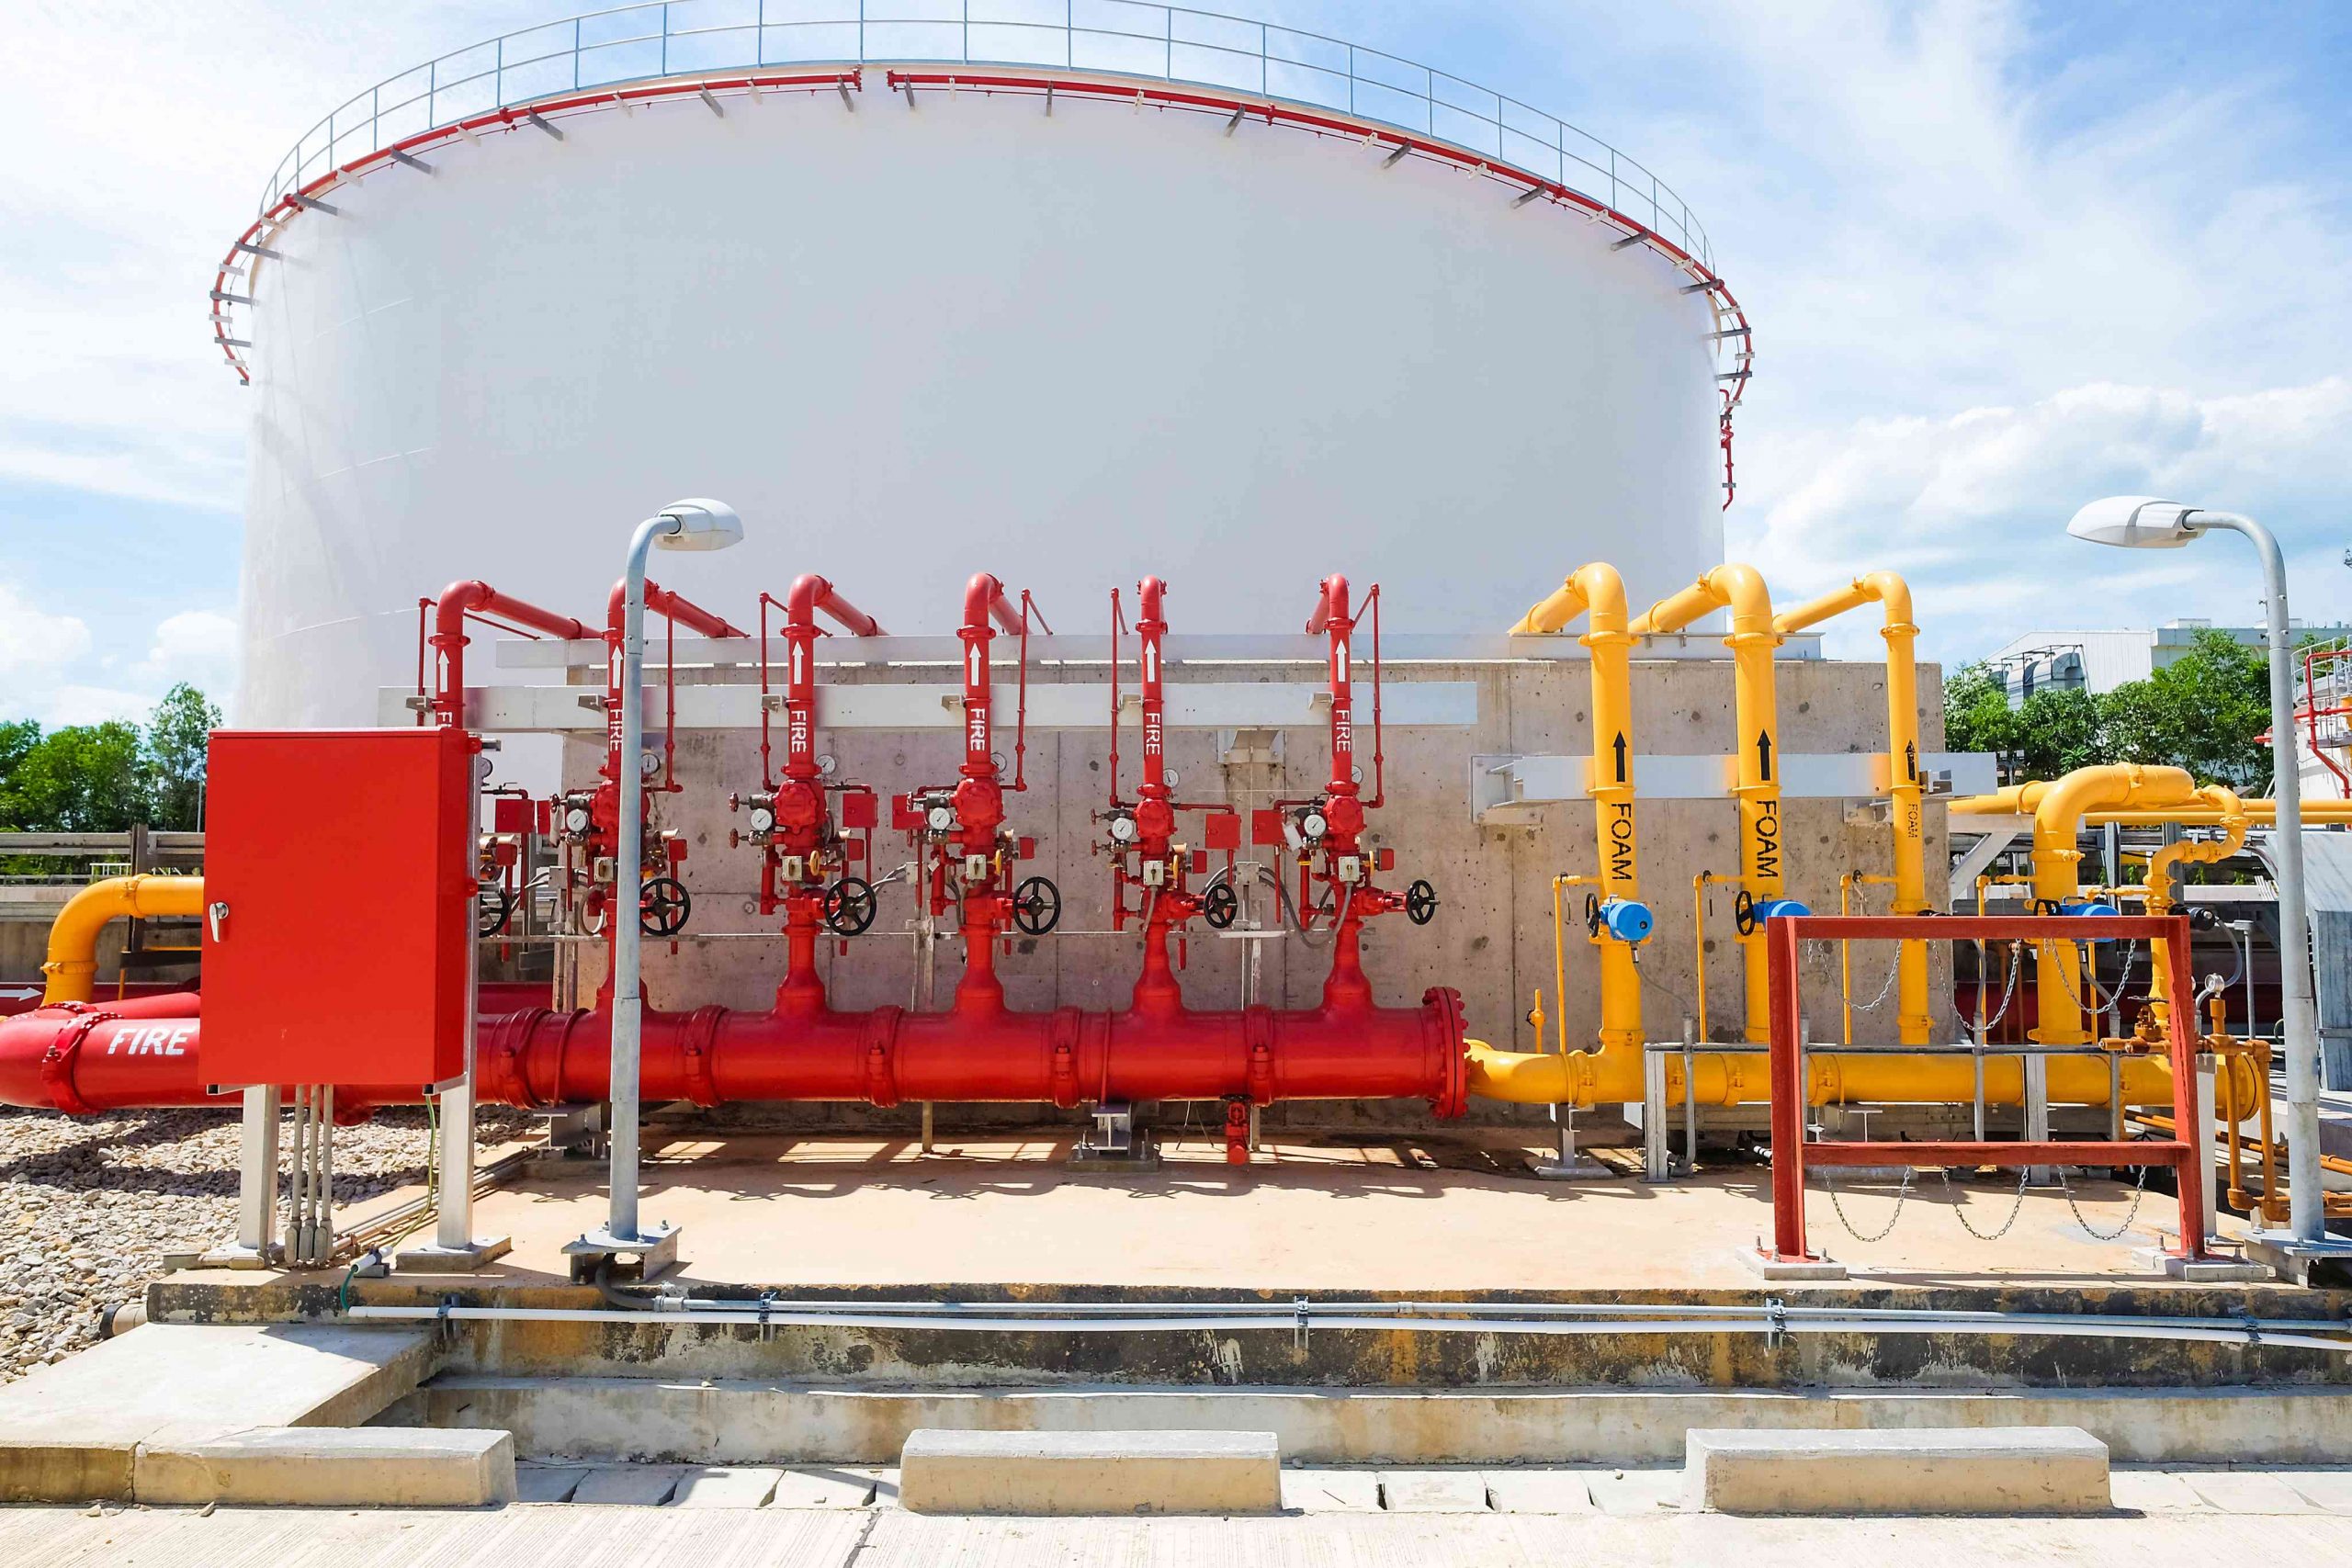 Image of industrial storage tank with fire protection system